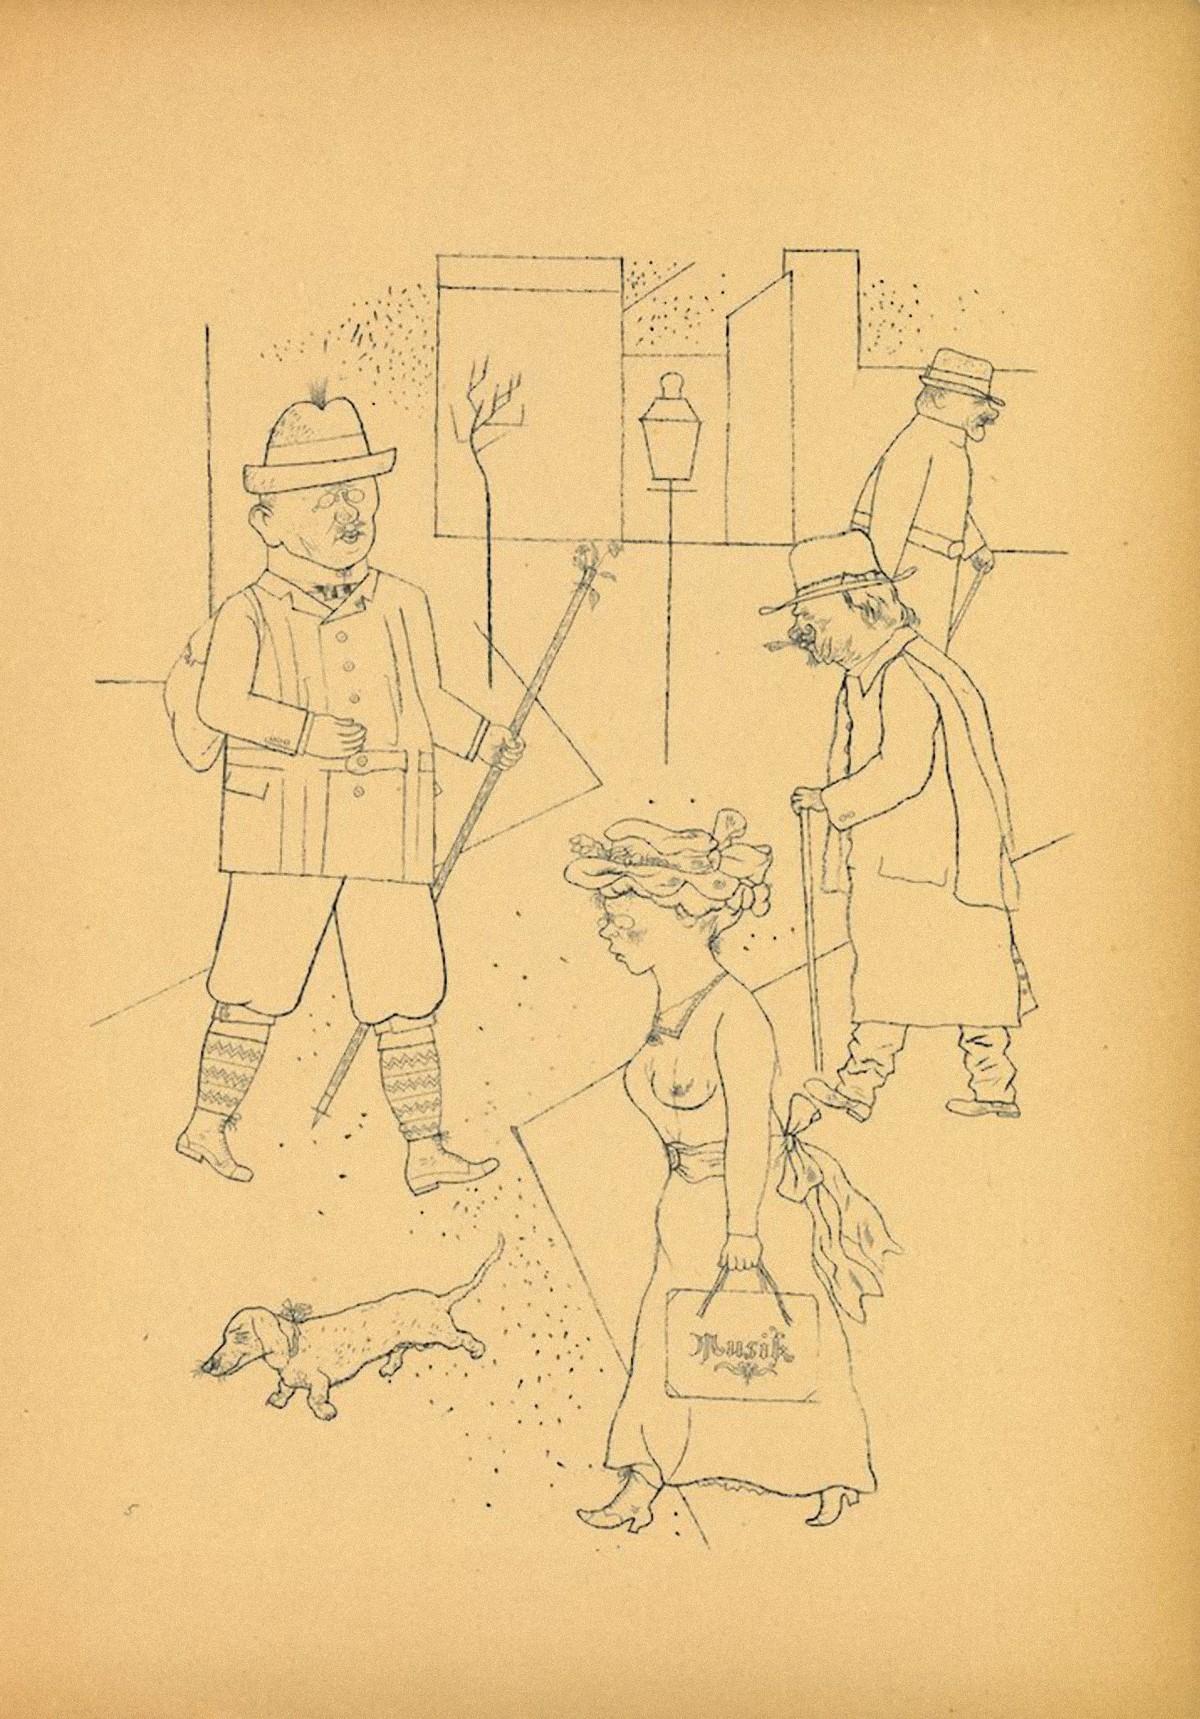 Greeting  is an original offset and lithograph realized by George Grosz.

The artwork is the plate n. 5 from the portfolio Ecce Homo published between 1922/1923, edition of Der Malik-Verlag Berlin.

Numbered on the plate on the lower margin.